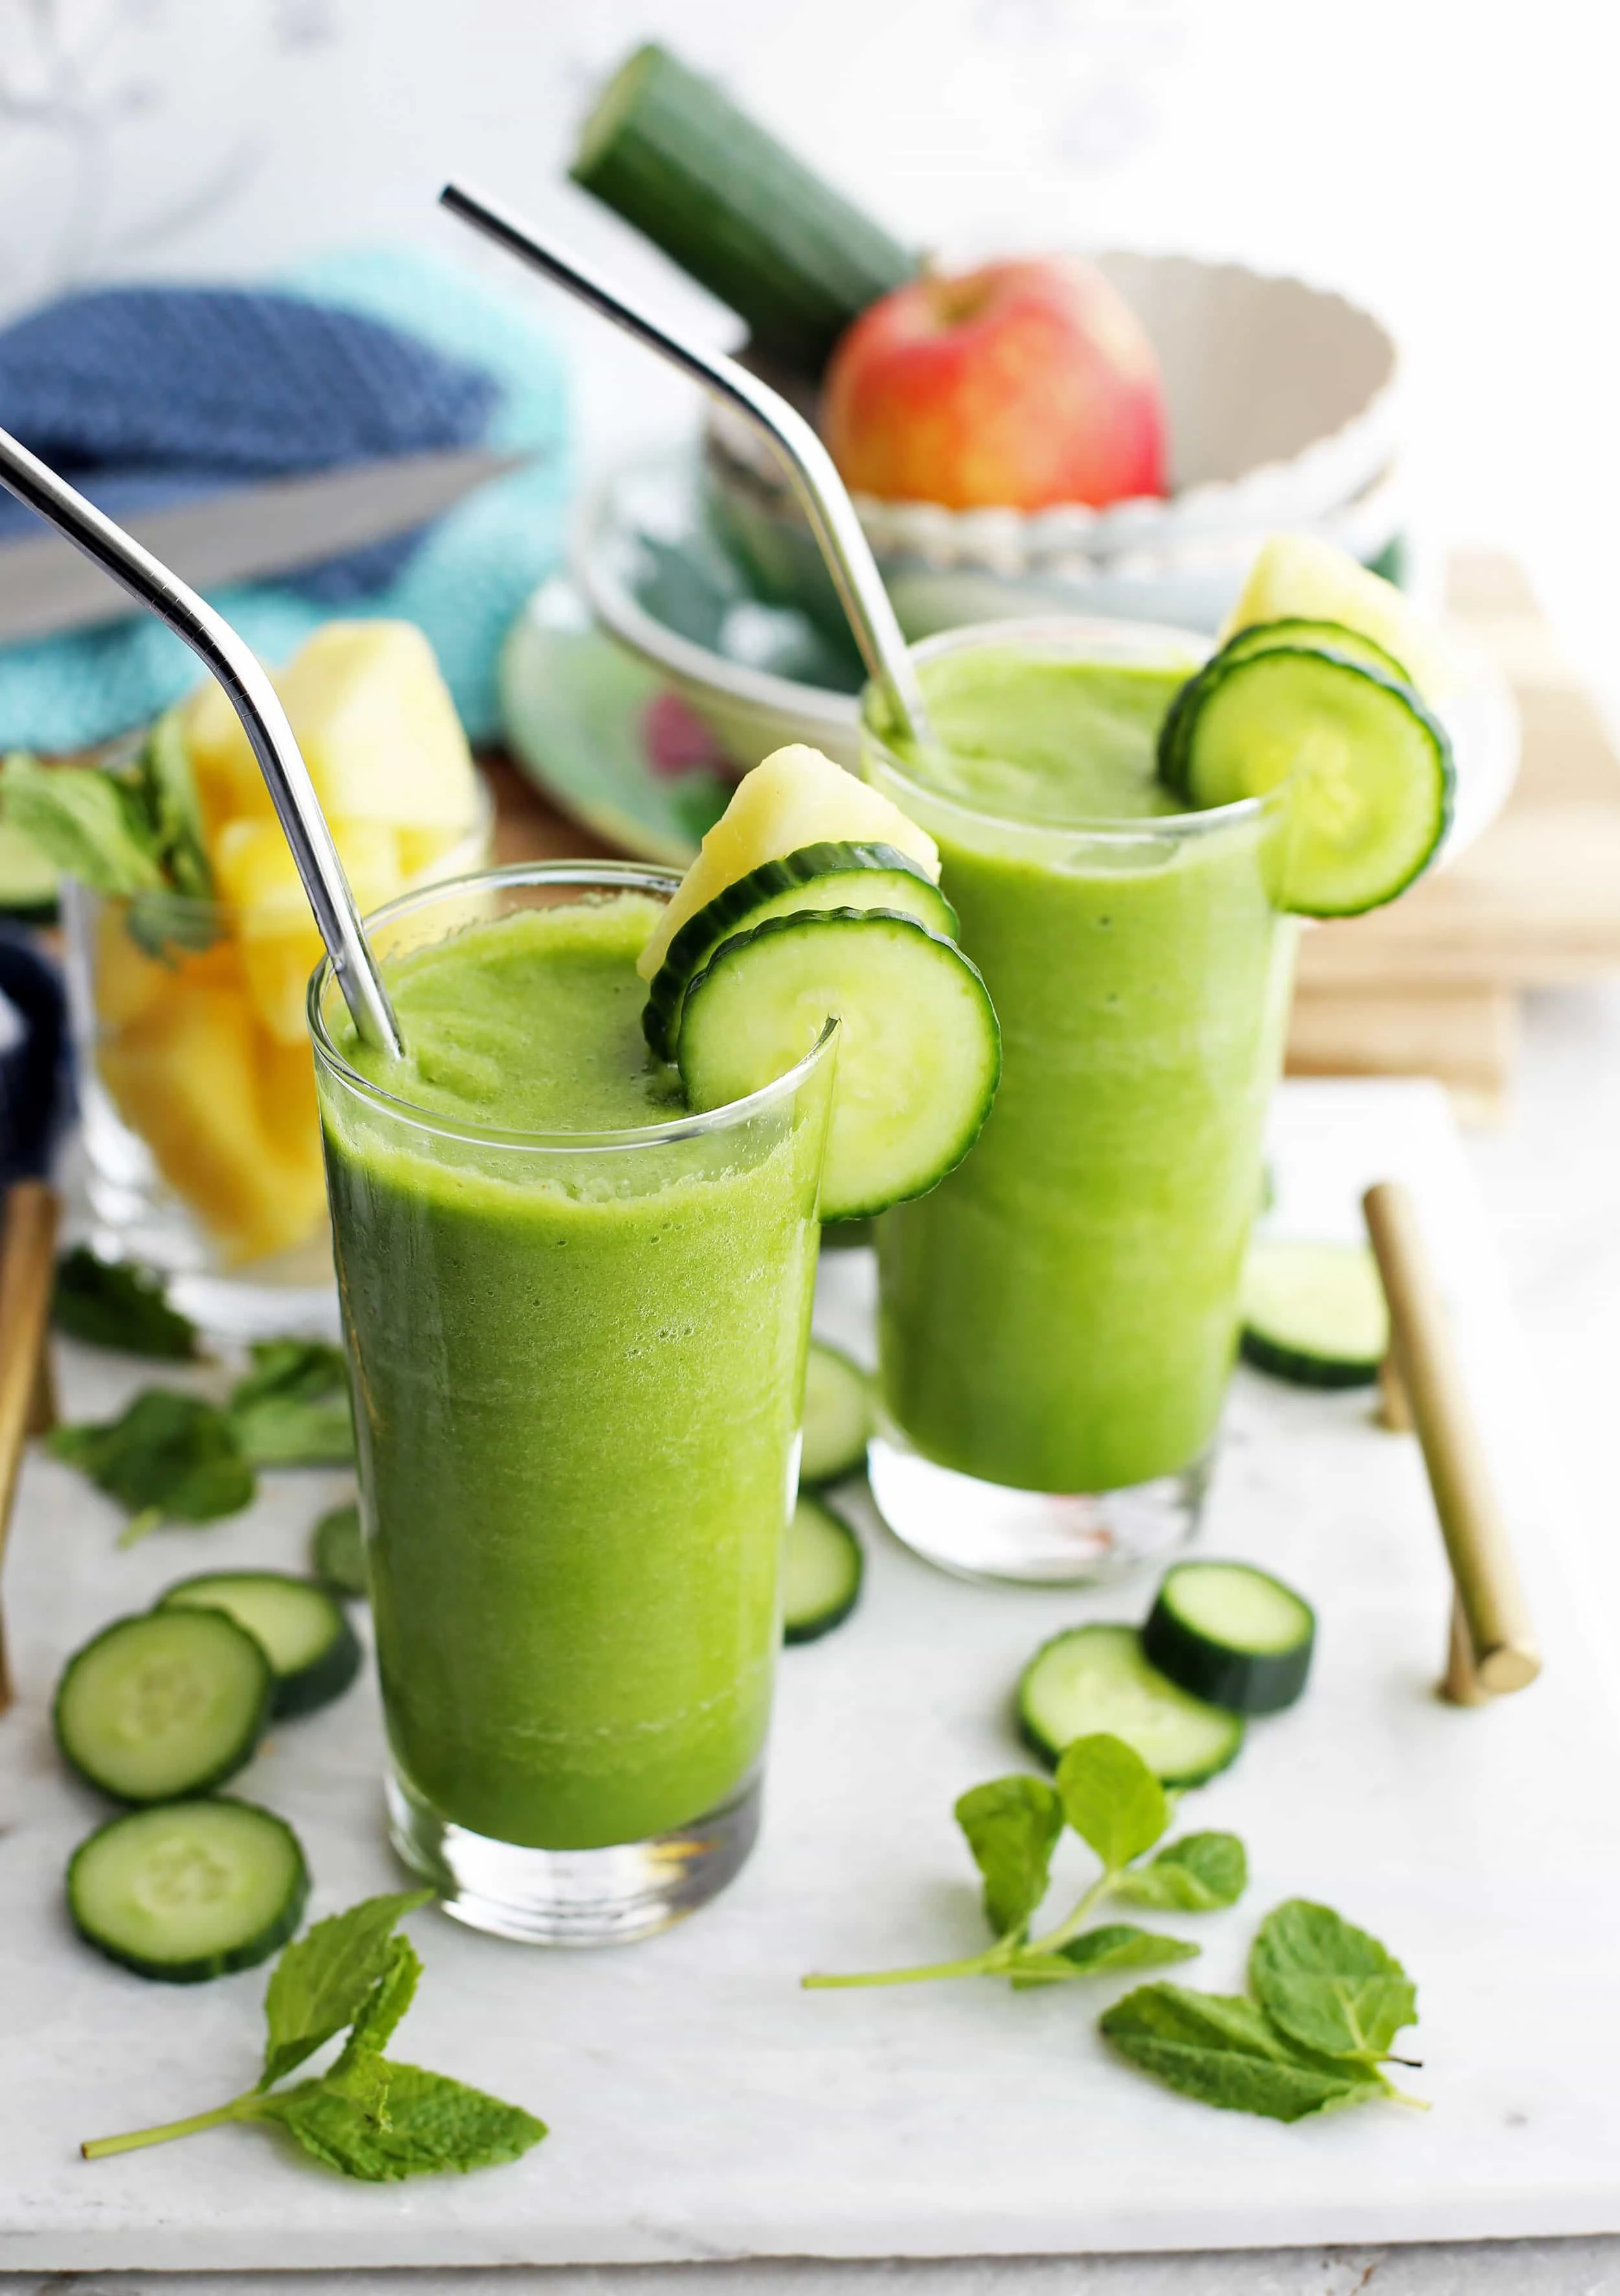 Two Cucumber Mint Pineapple Smoothies in tall glasses that are garnished with cucumber slices, pineapple slices, and straws.